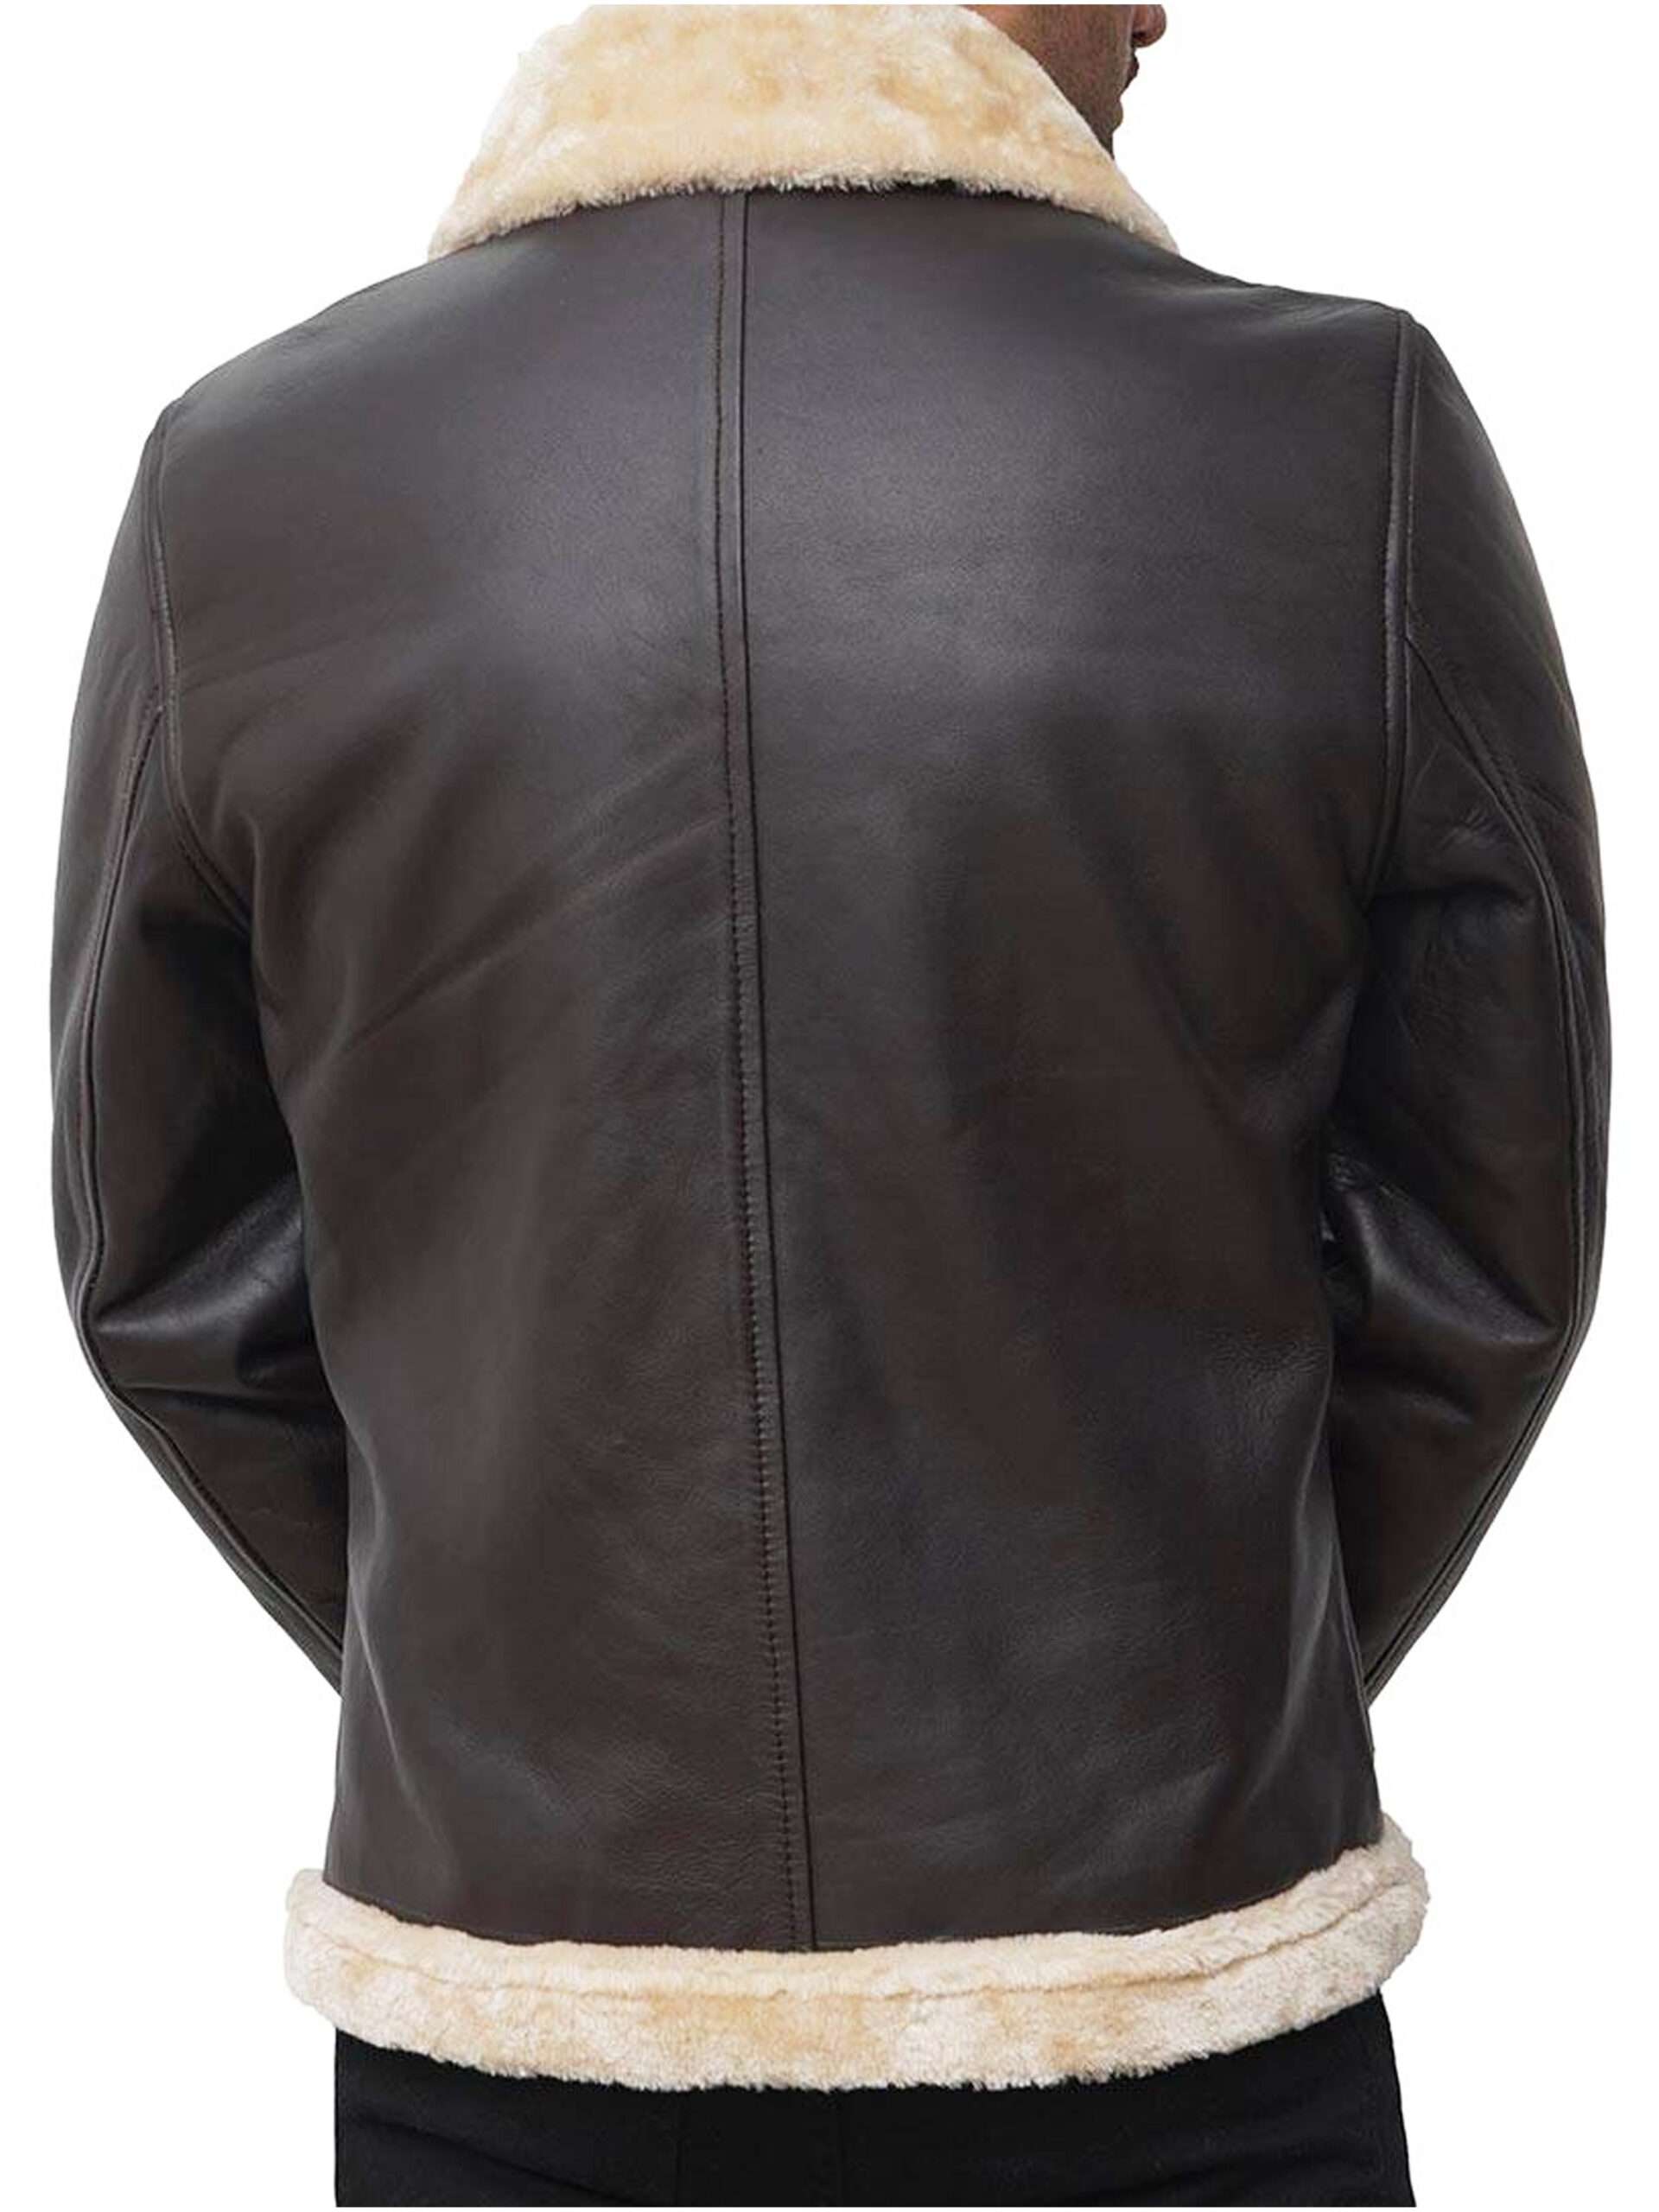 Shearling Dark Brown Real Leather Bomber Jacket